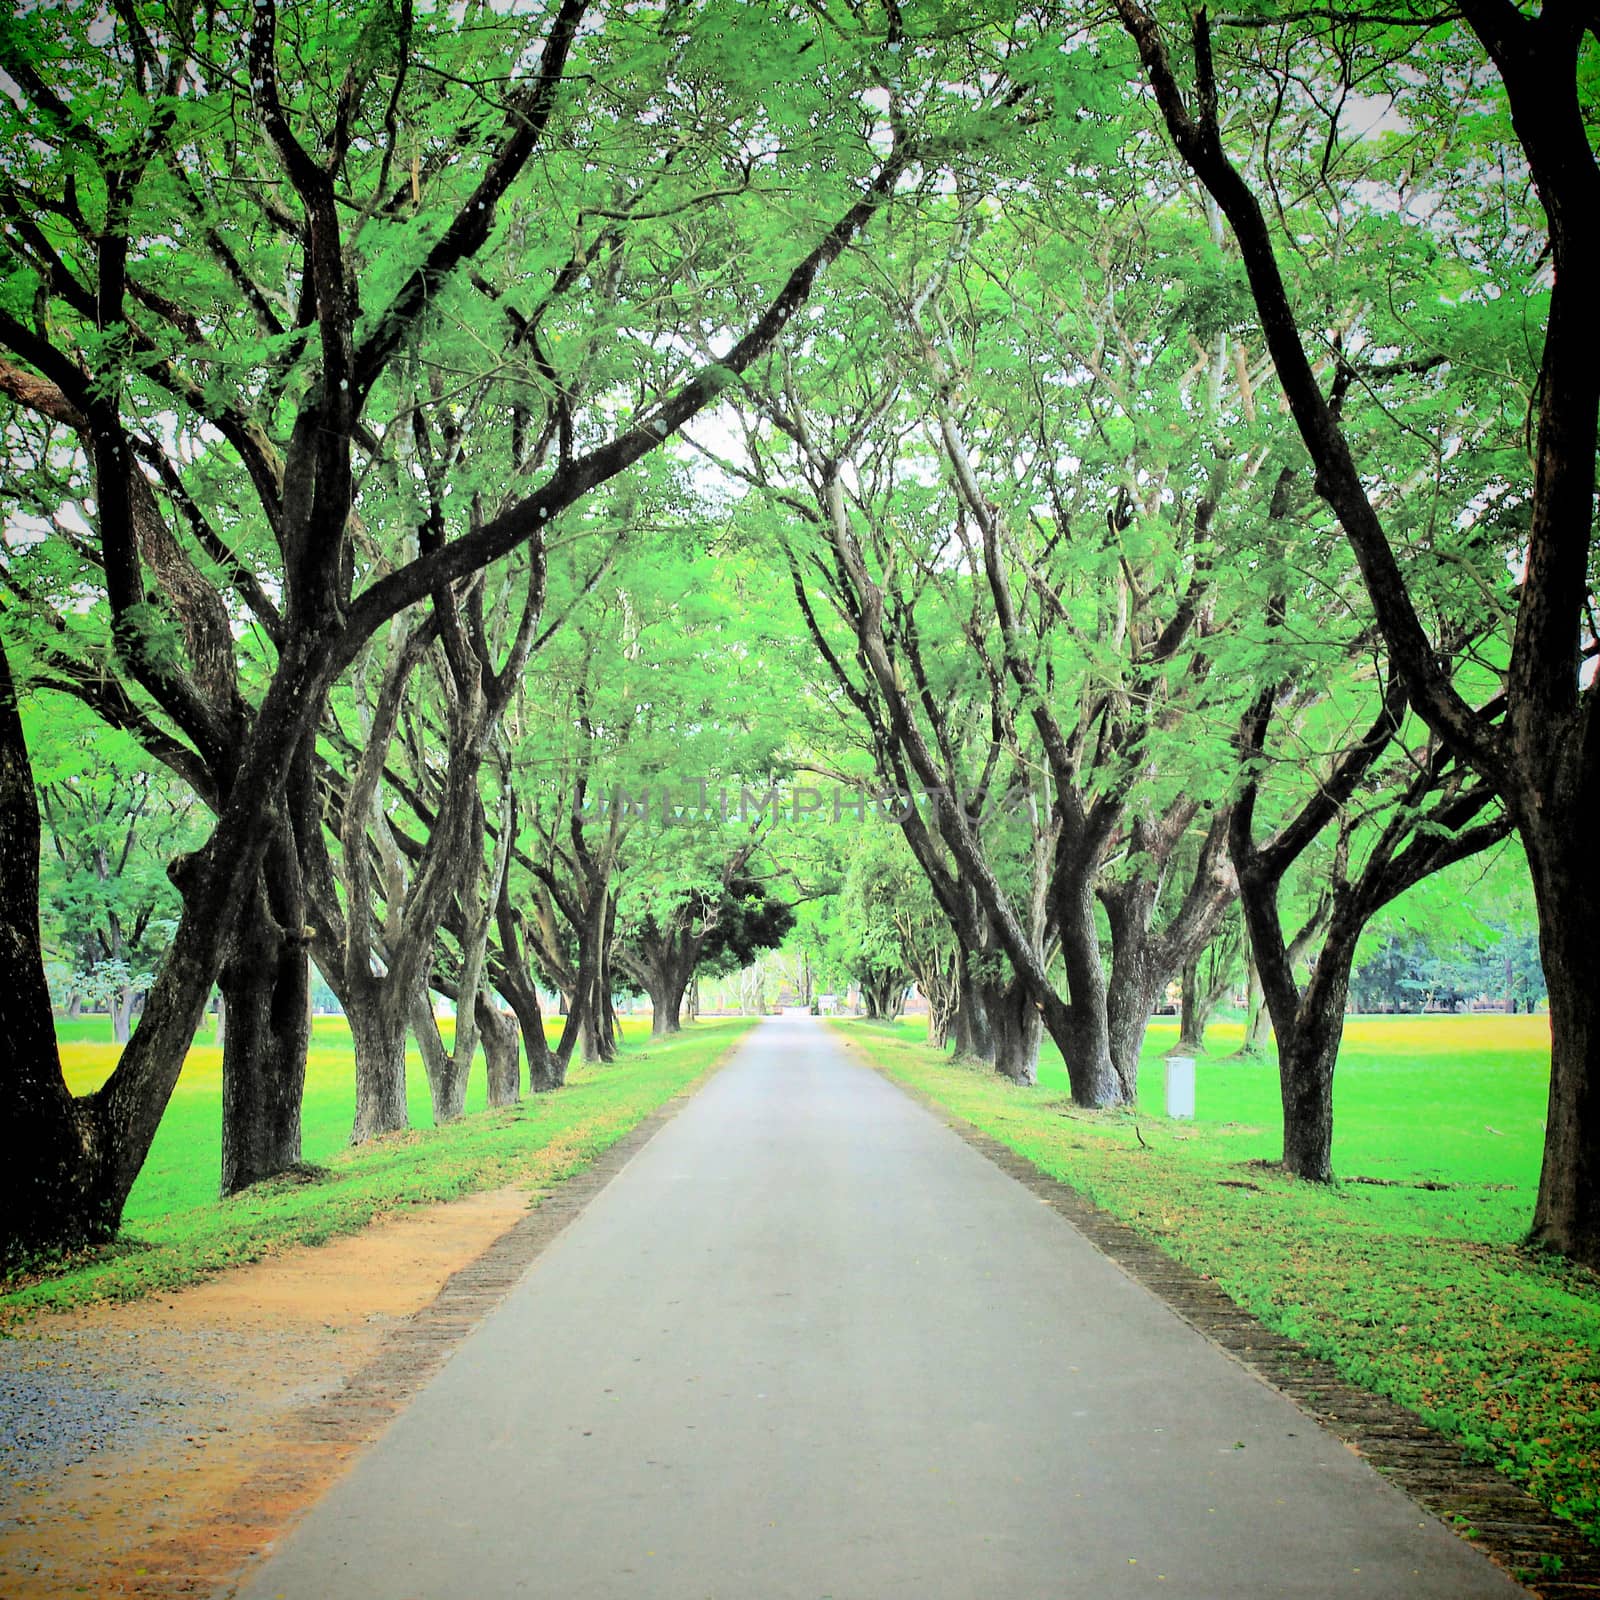 Road through row of green trees wtih retro filter effect by nuchylee